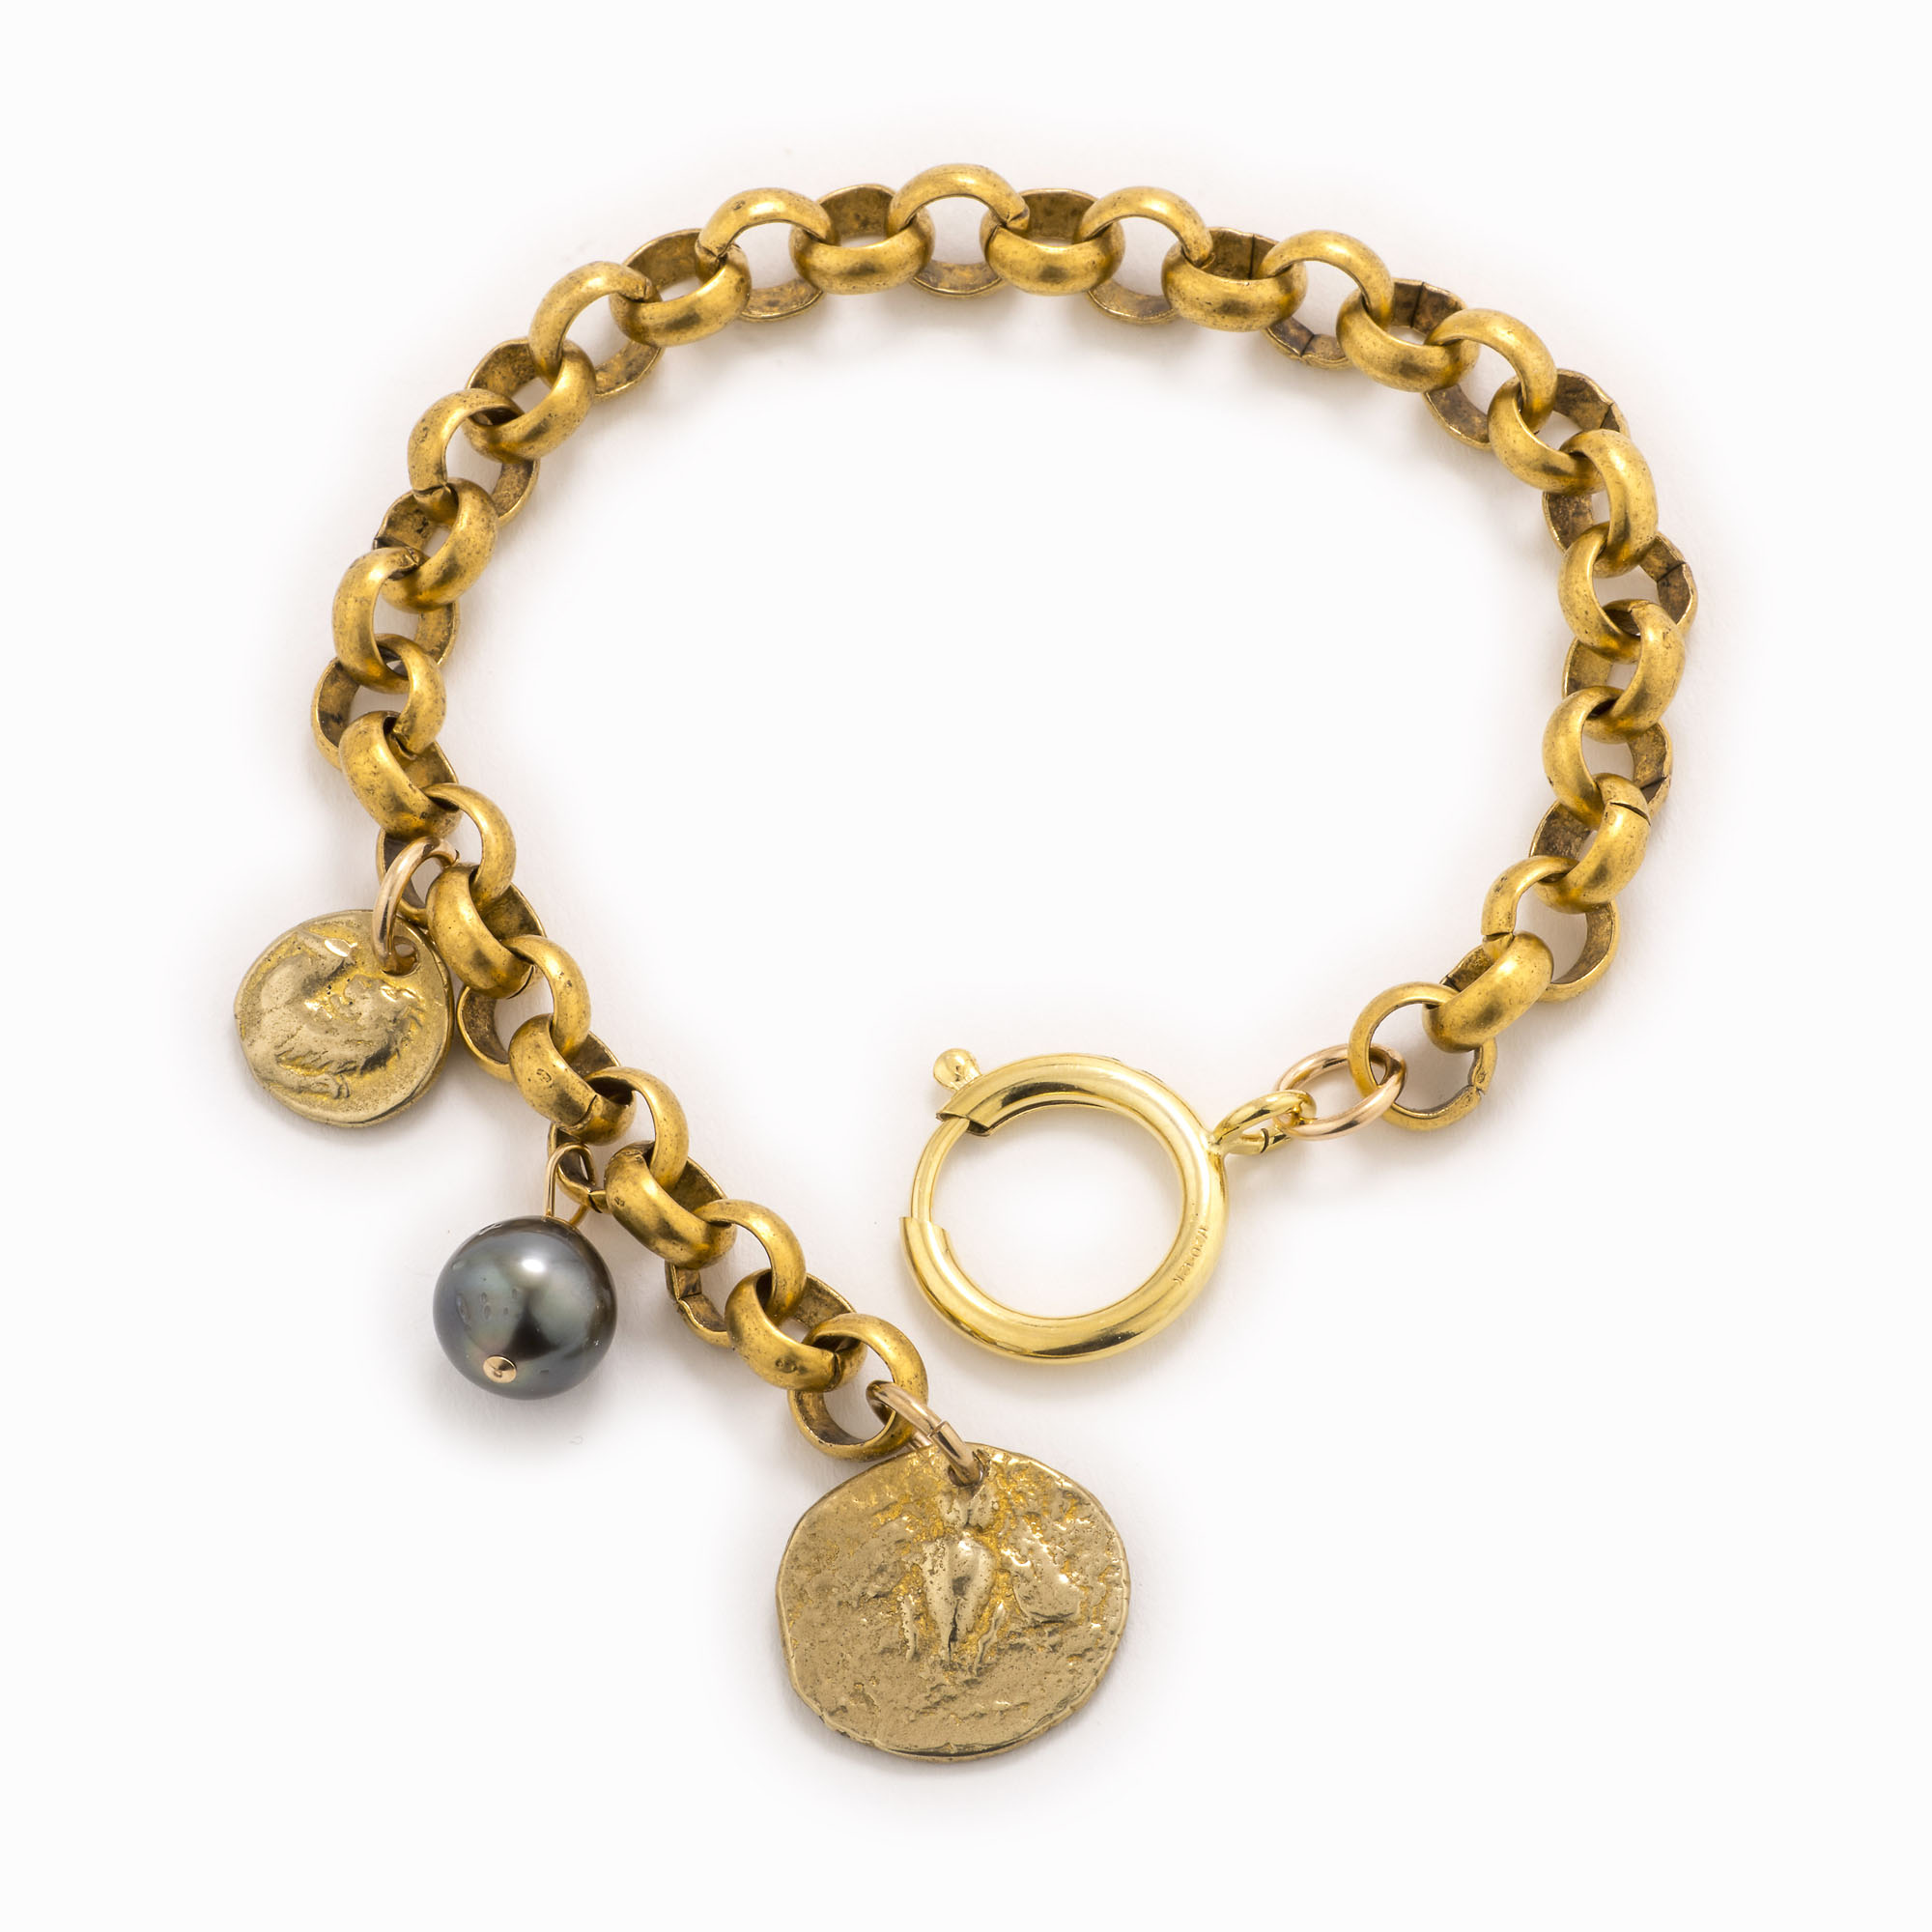 Featured image for “Hudson Brass Chain Bracelet”